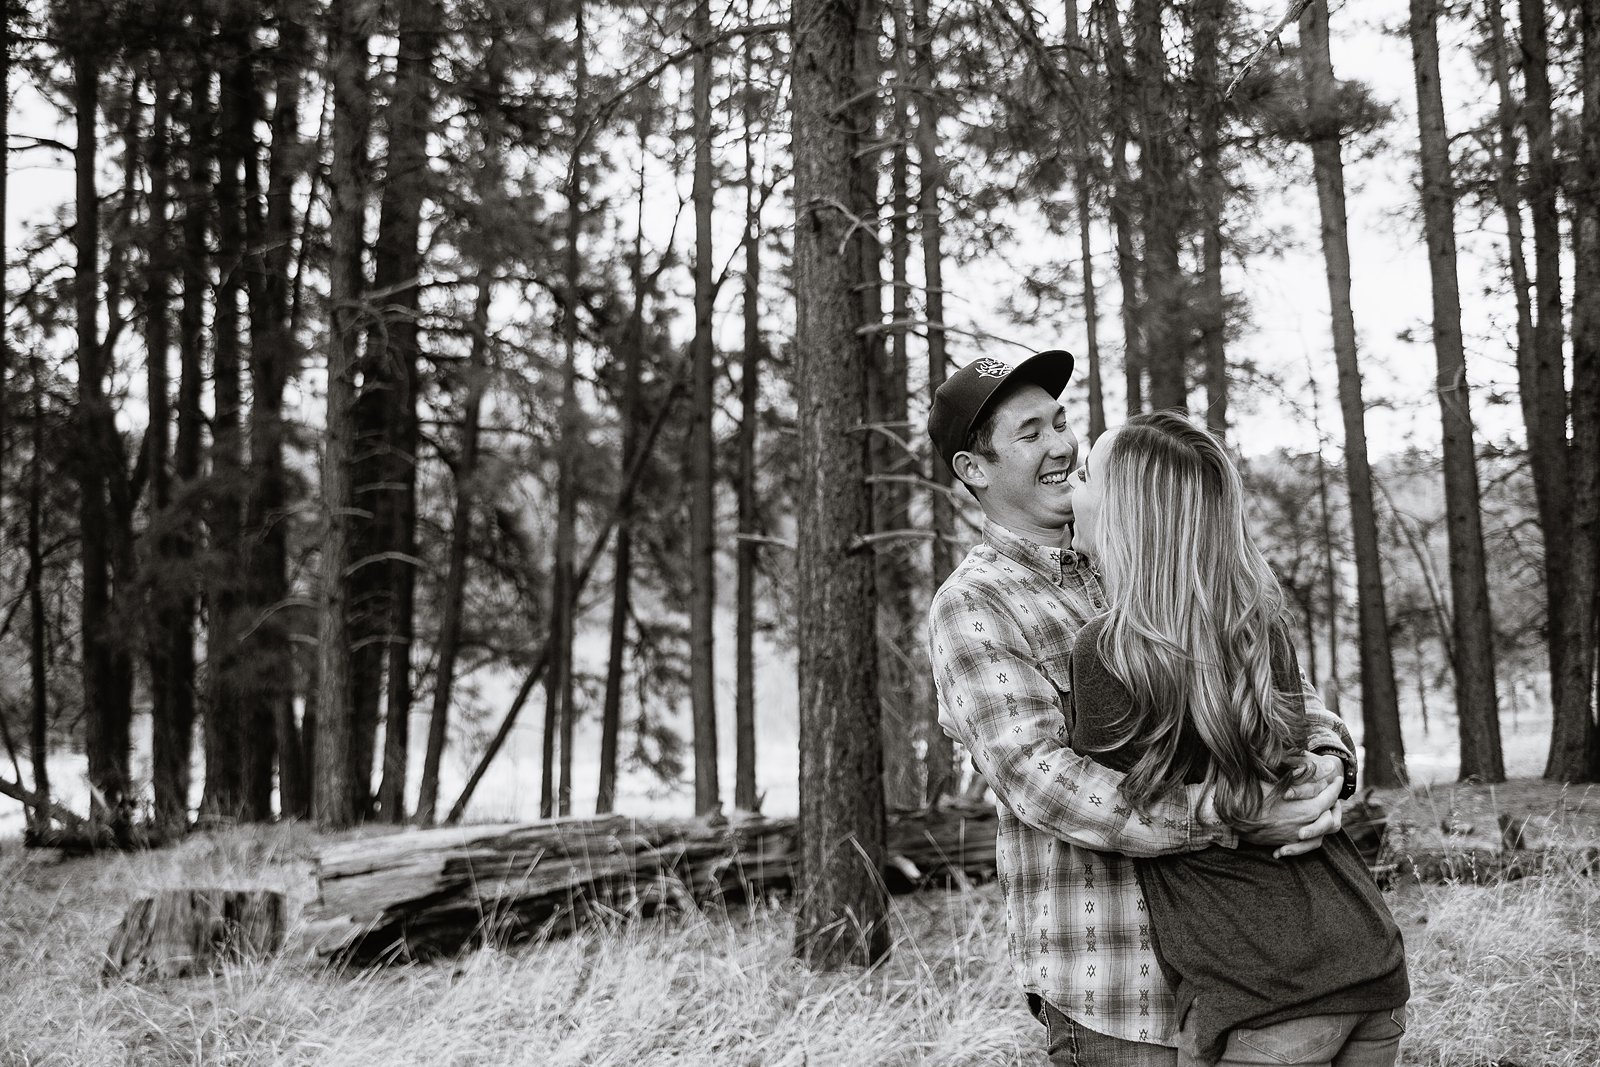 Couple laughing together during their engagement session by Flagstaff engagement photographer PMA Photography.